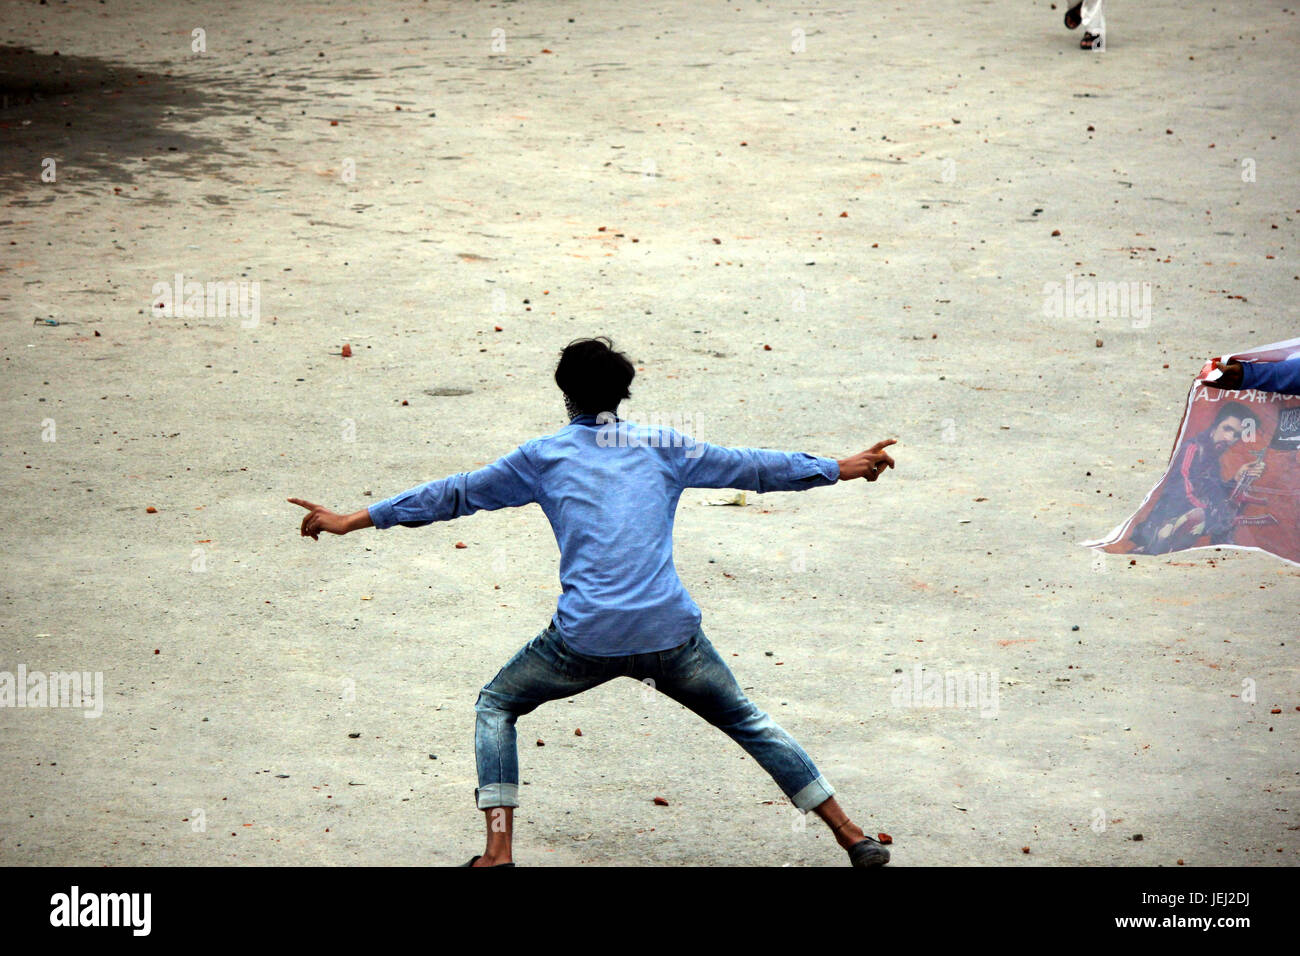 Anantnag, India. 26th June, 2017. Kashmiri protesters pelting stones at the police and paramilitary soldiers during clashes after the culmination of Eid-ul-Fitr congregational prayers, on July 26, 2017 in Anantnag, 50 KM from Srinagar. Dozens were injured in clashes that broke out between protesters and security forces after Eid prayers. Credit: Muneeb Ul Islam/Pacific Press/Alamy Live News Stock Photo